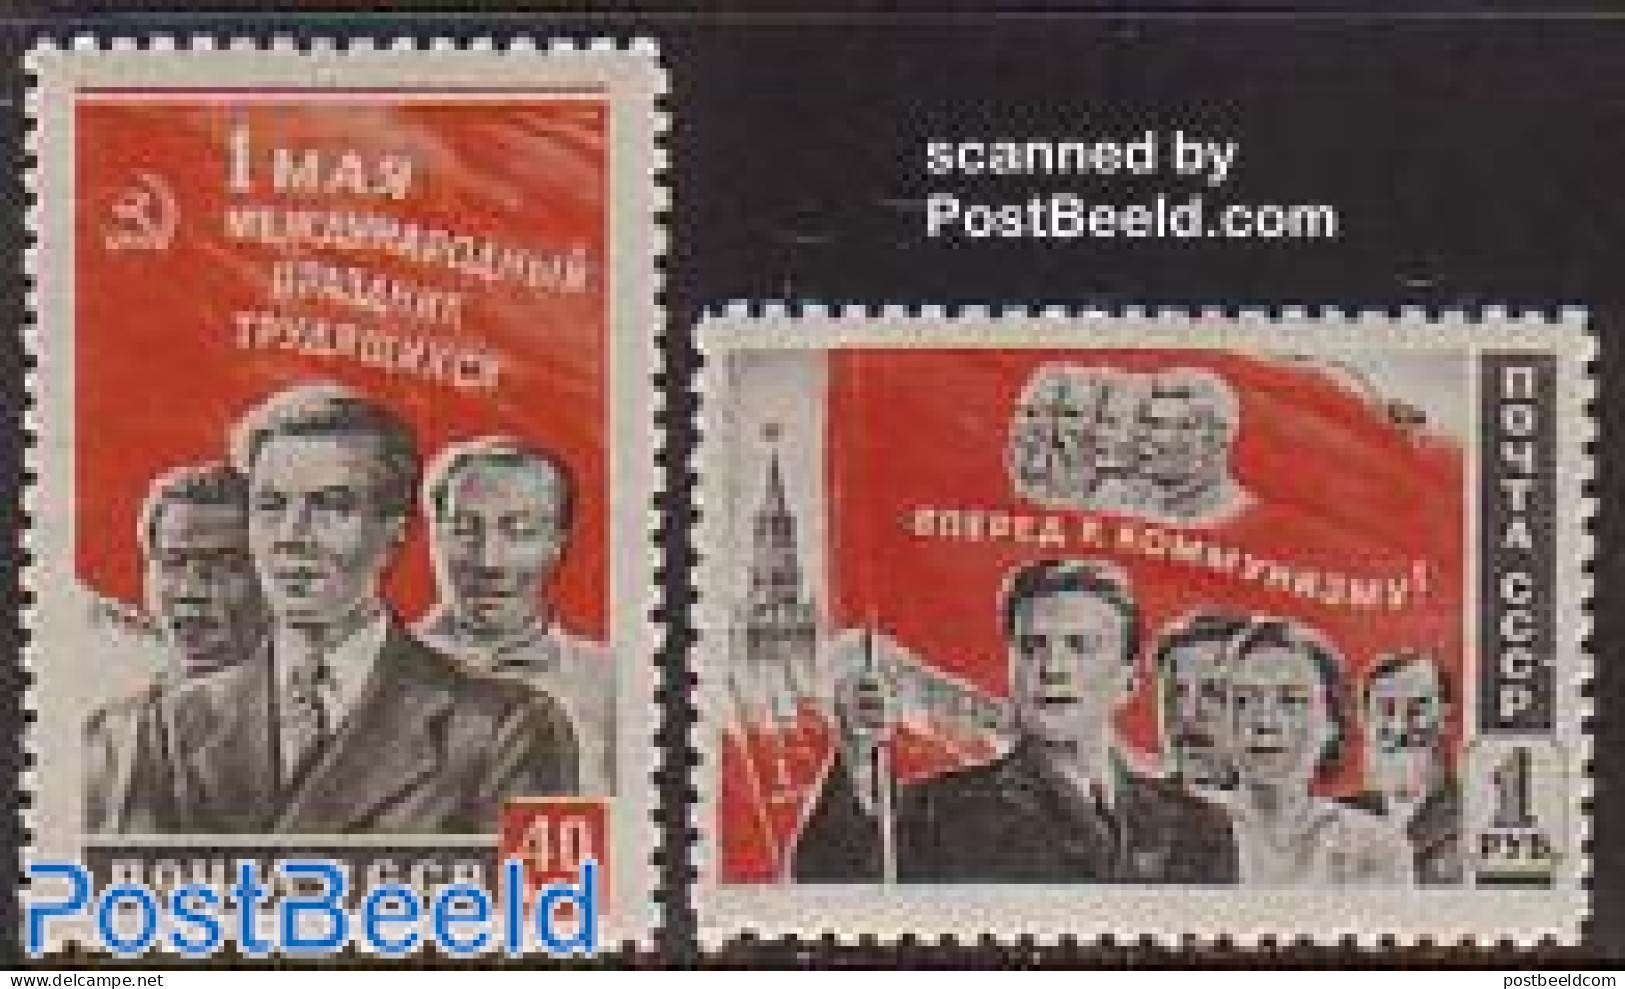 Russia, Soviet Union 1950 60 Years Labour Day 2v, Mint NH, Various - Union - Unused Stamps